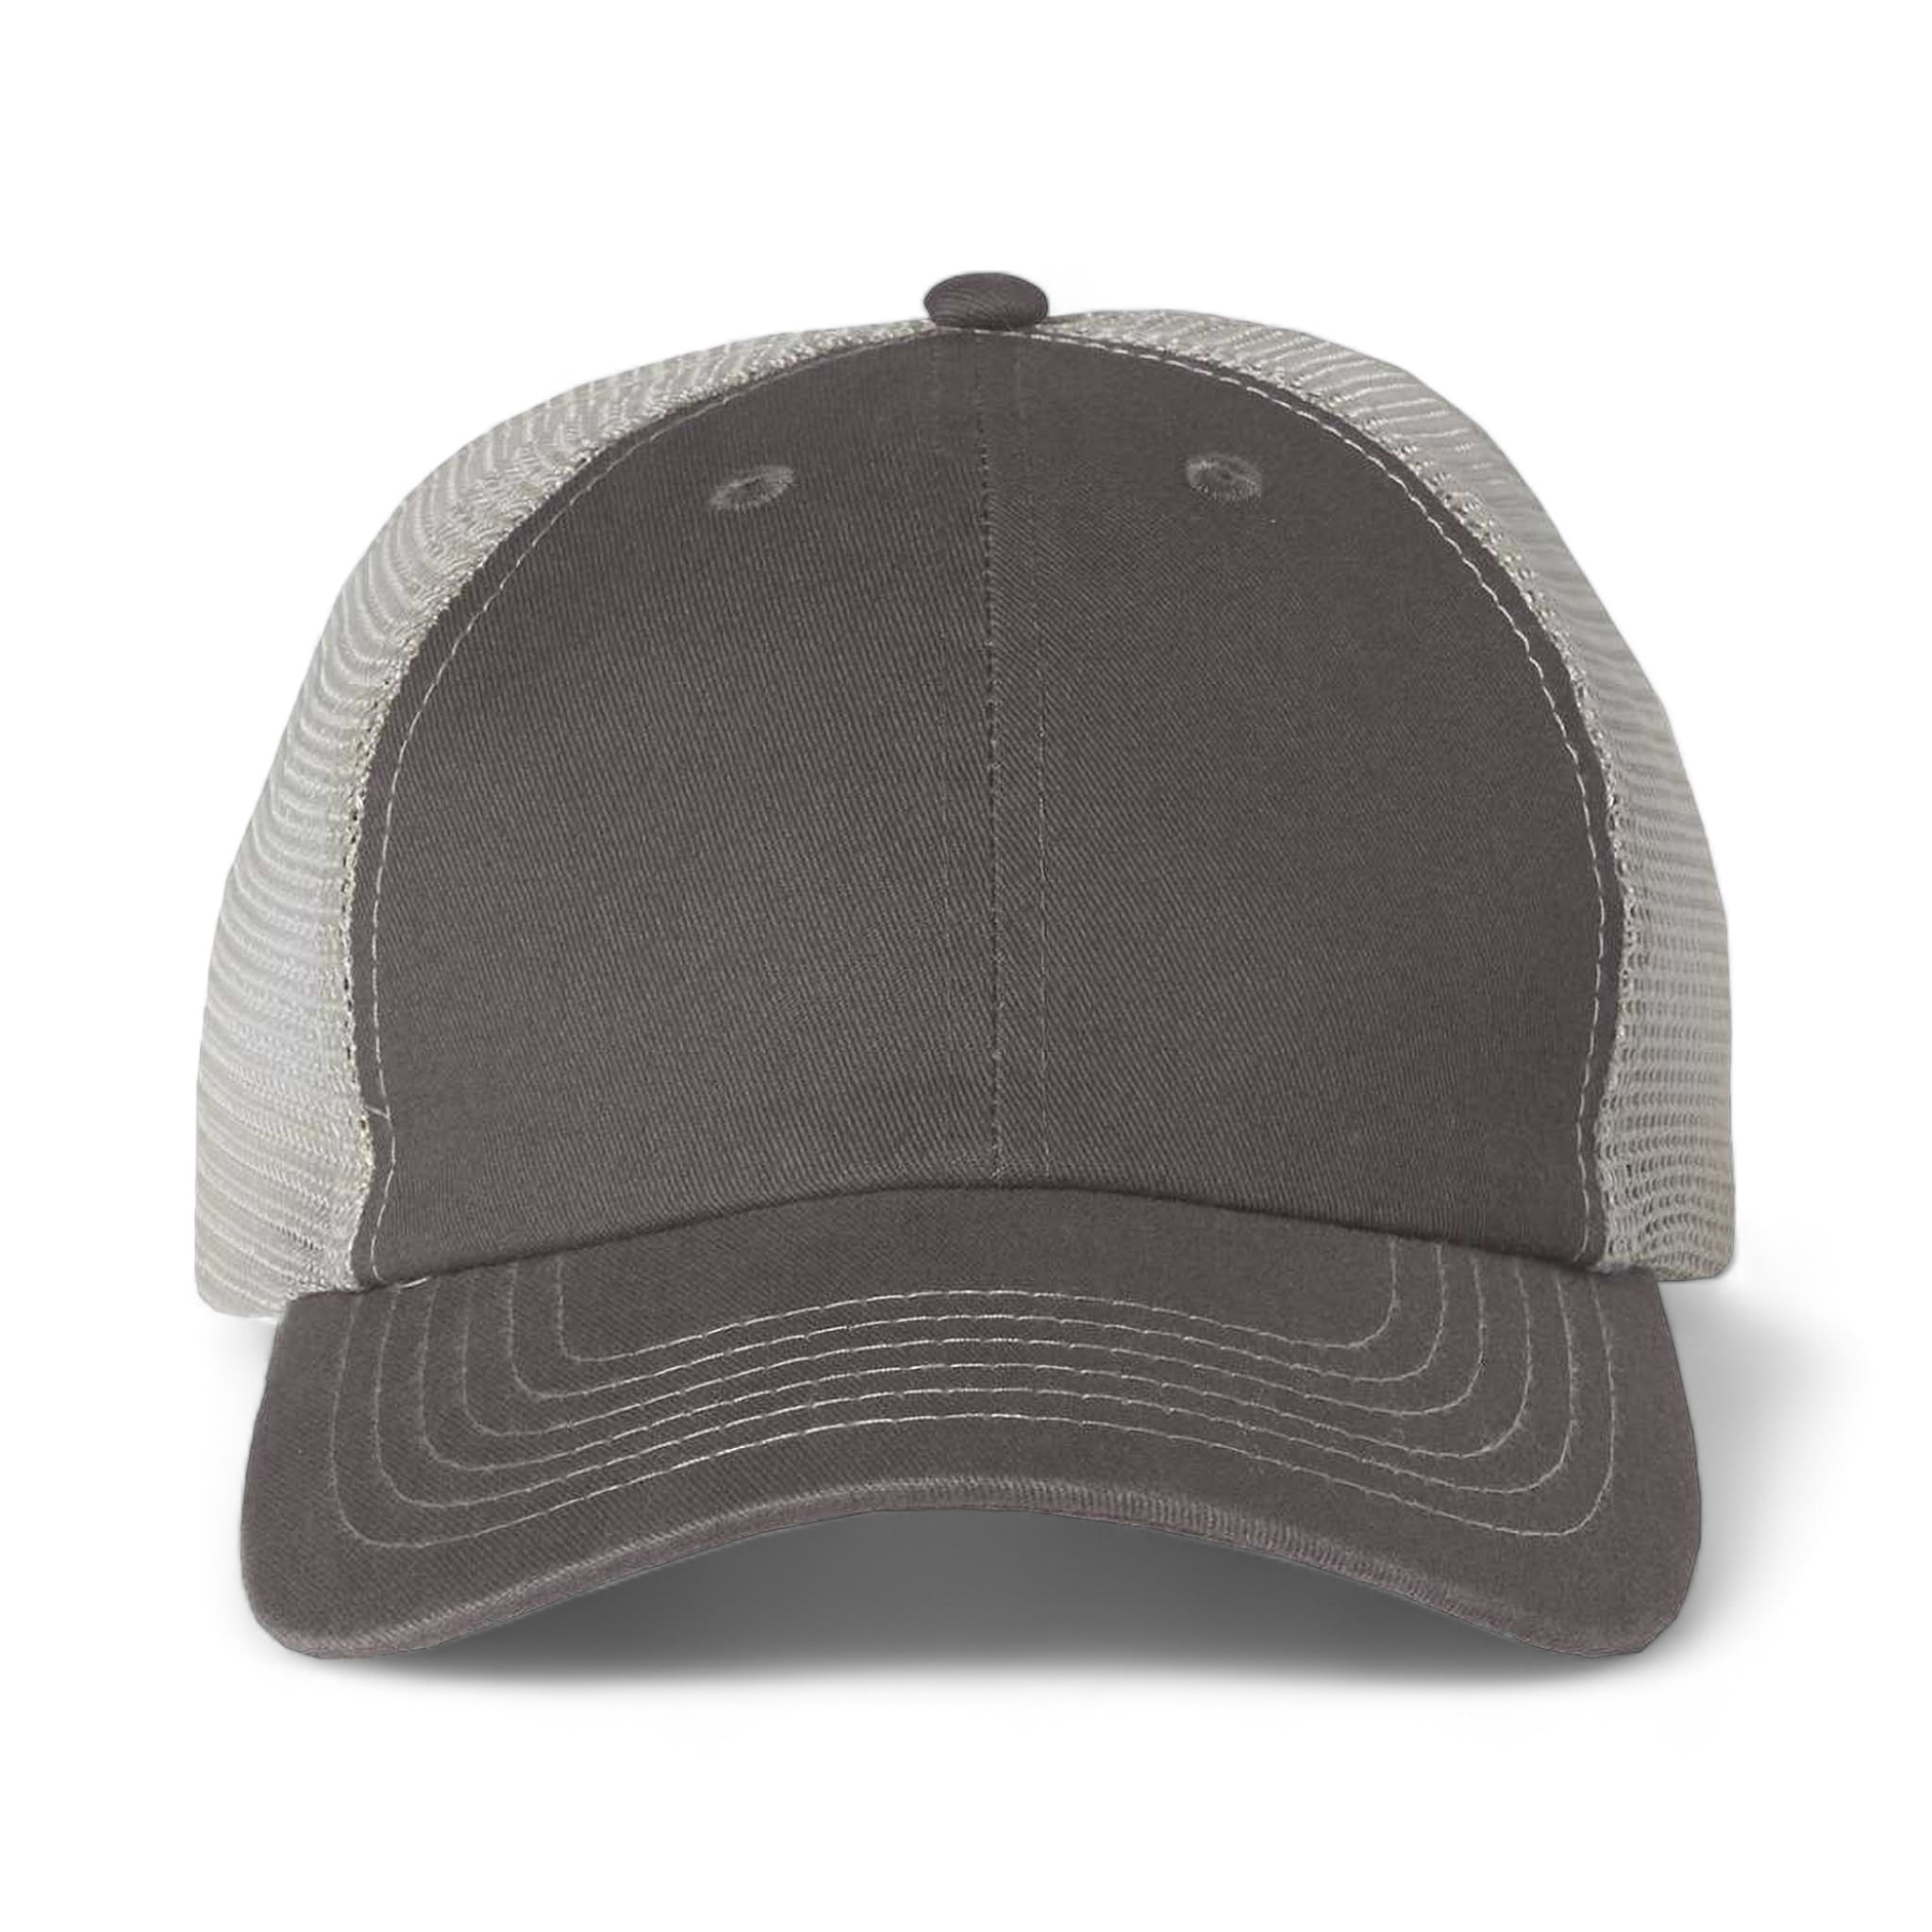 Front view of Sportsman 3100 custom hat in charcoal and stone